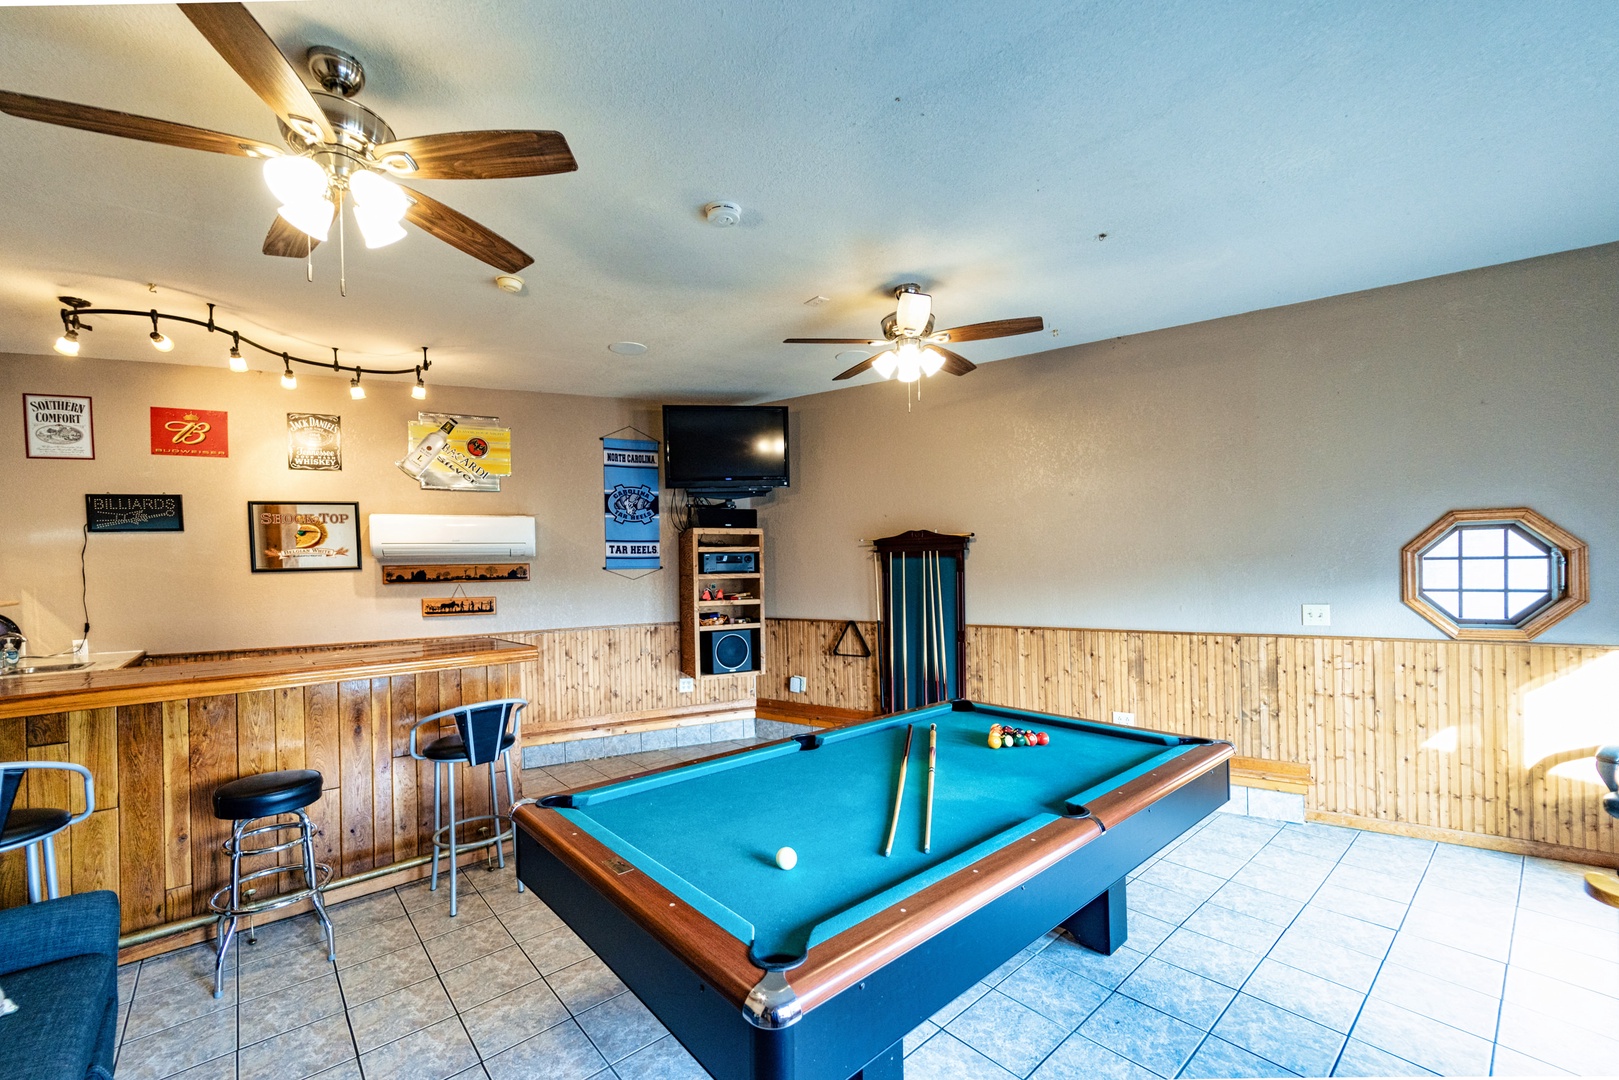 Game room with bar, convertible pool table, TV, and stereo system